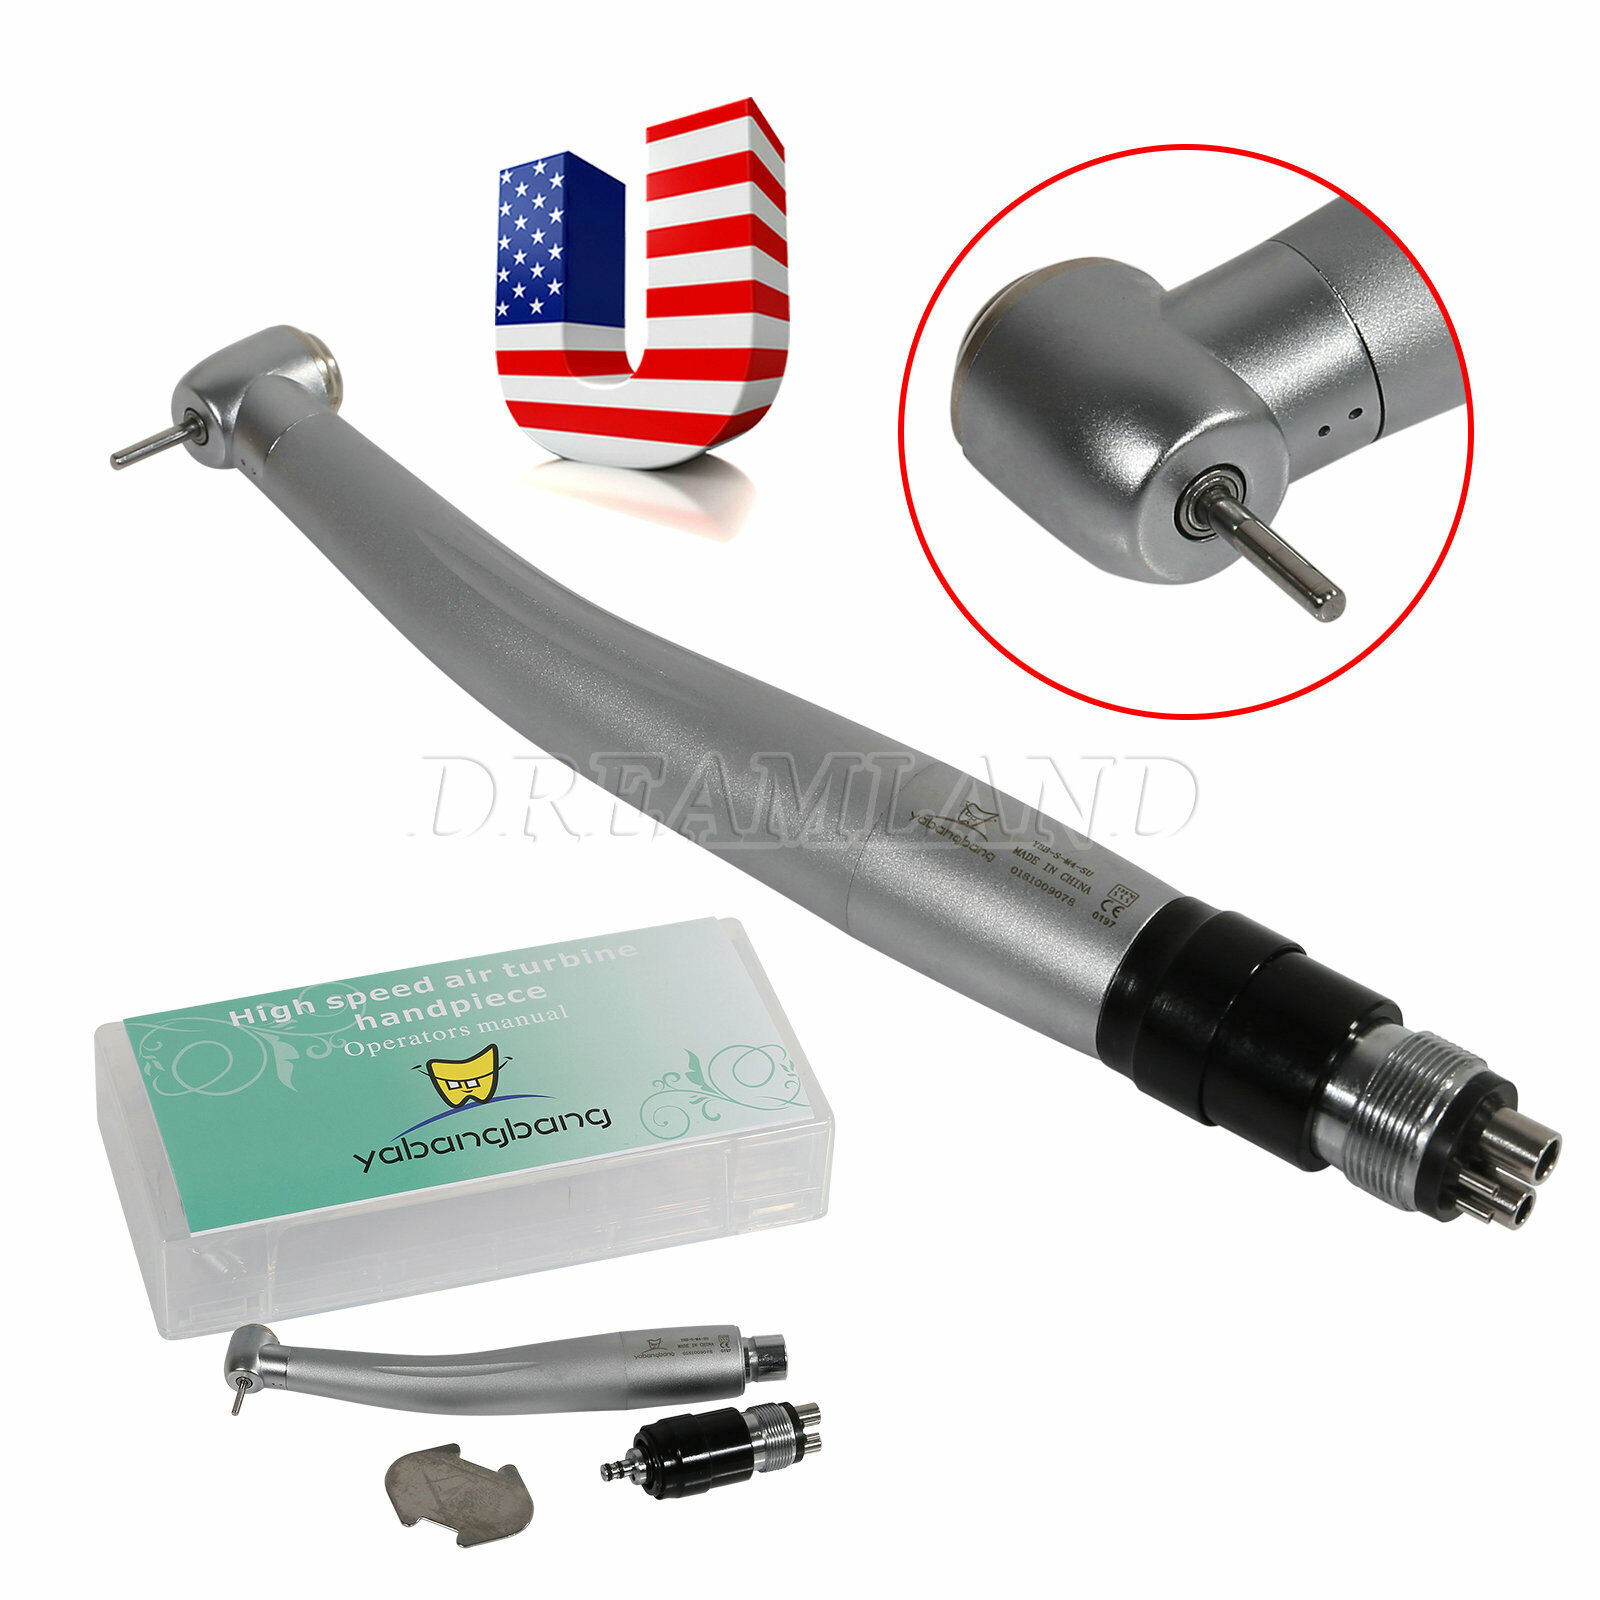 1-10 NSK STYLE Dental high speed handpiece with 4hole quick coupler connect m4